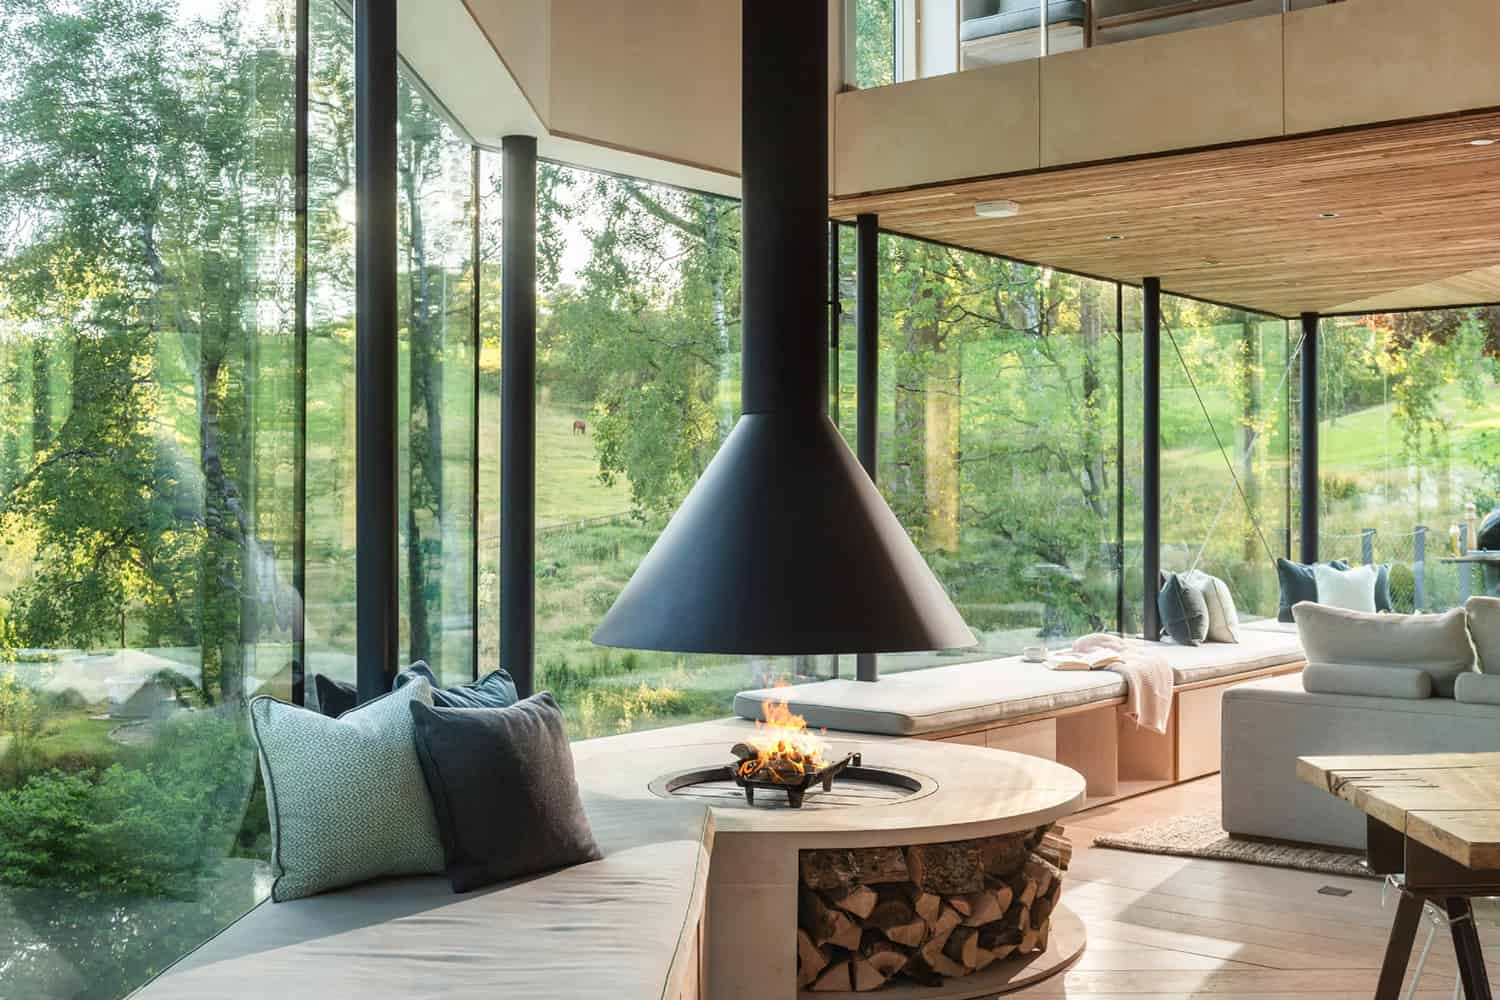 A timber clad retreat inspired by nature in the English countryside